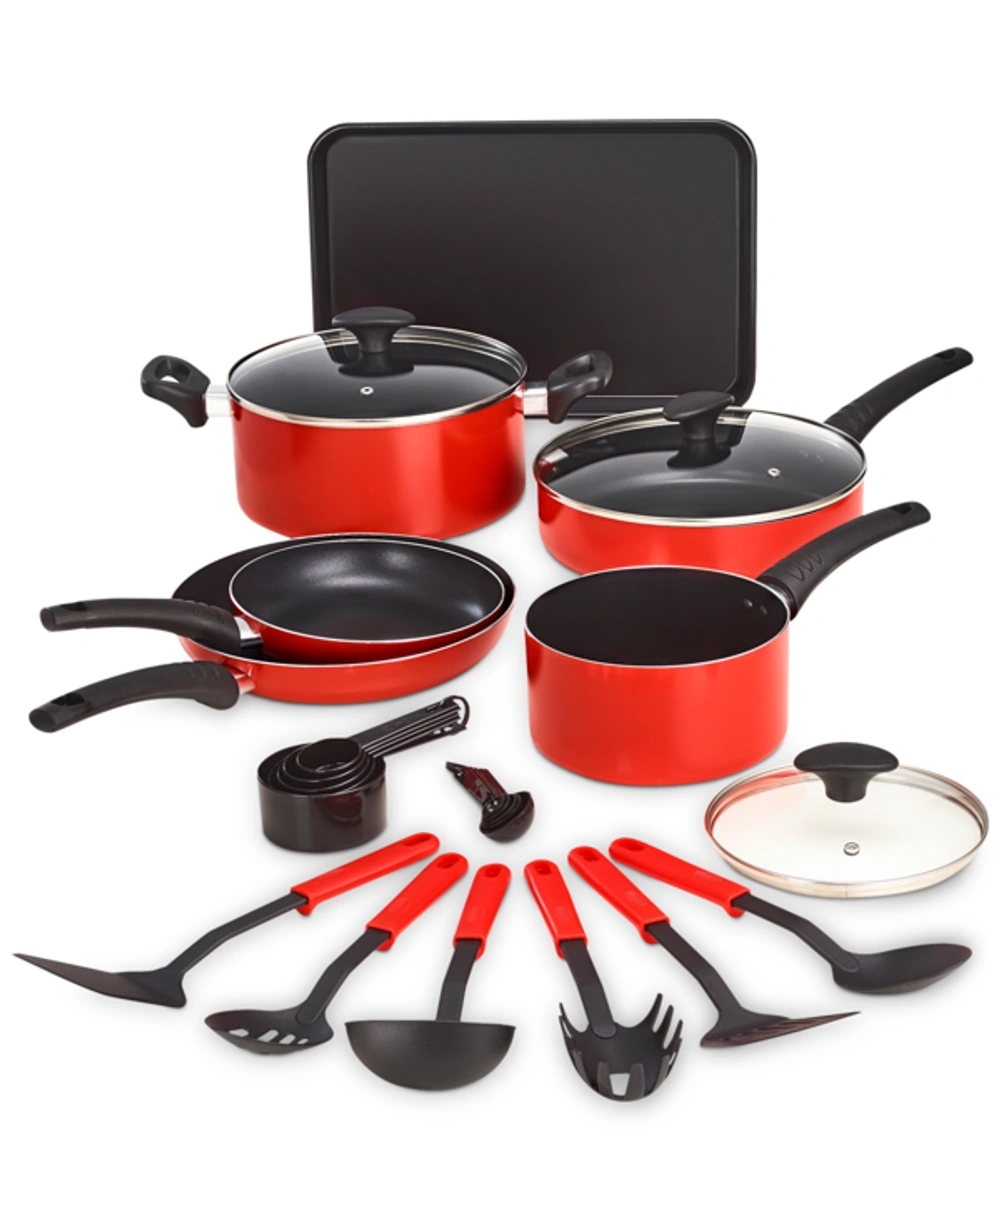 Bella 17-Pc. Cookware Set - Red